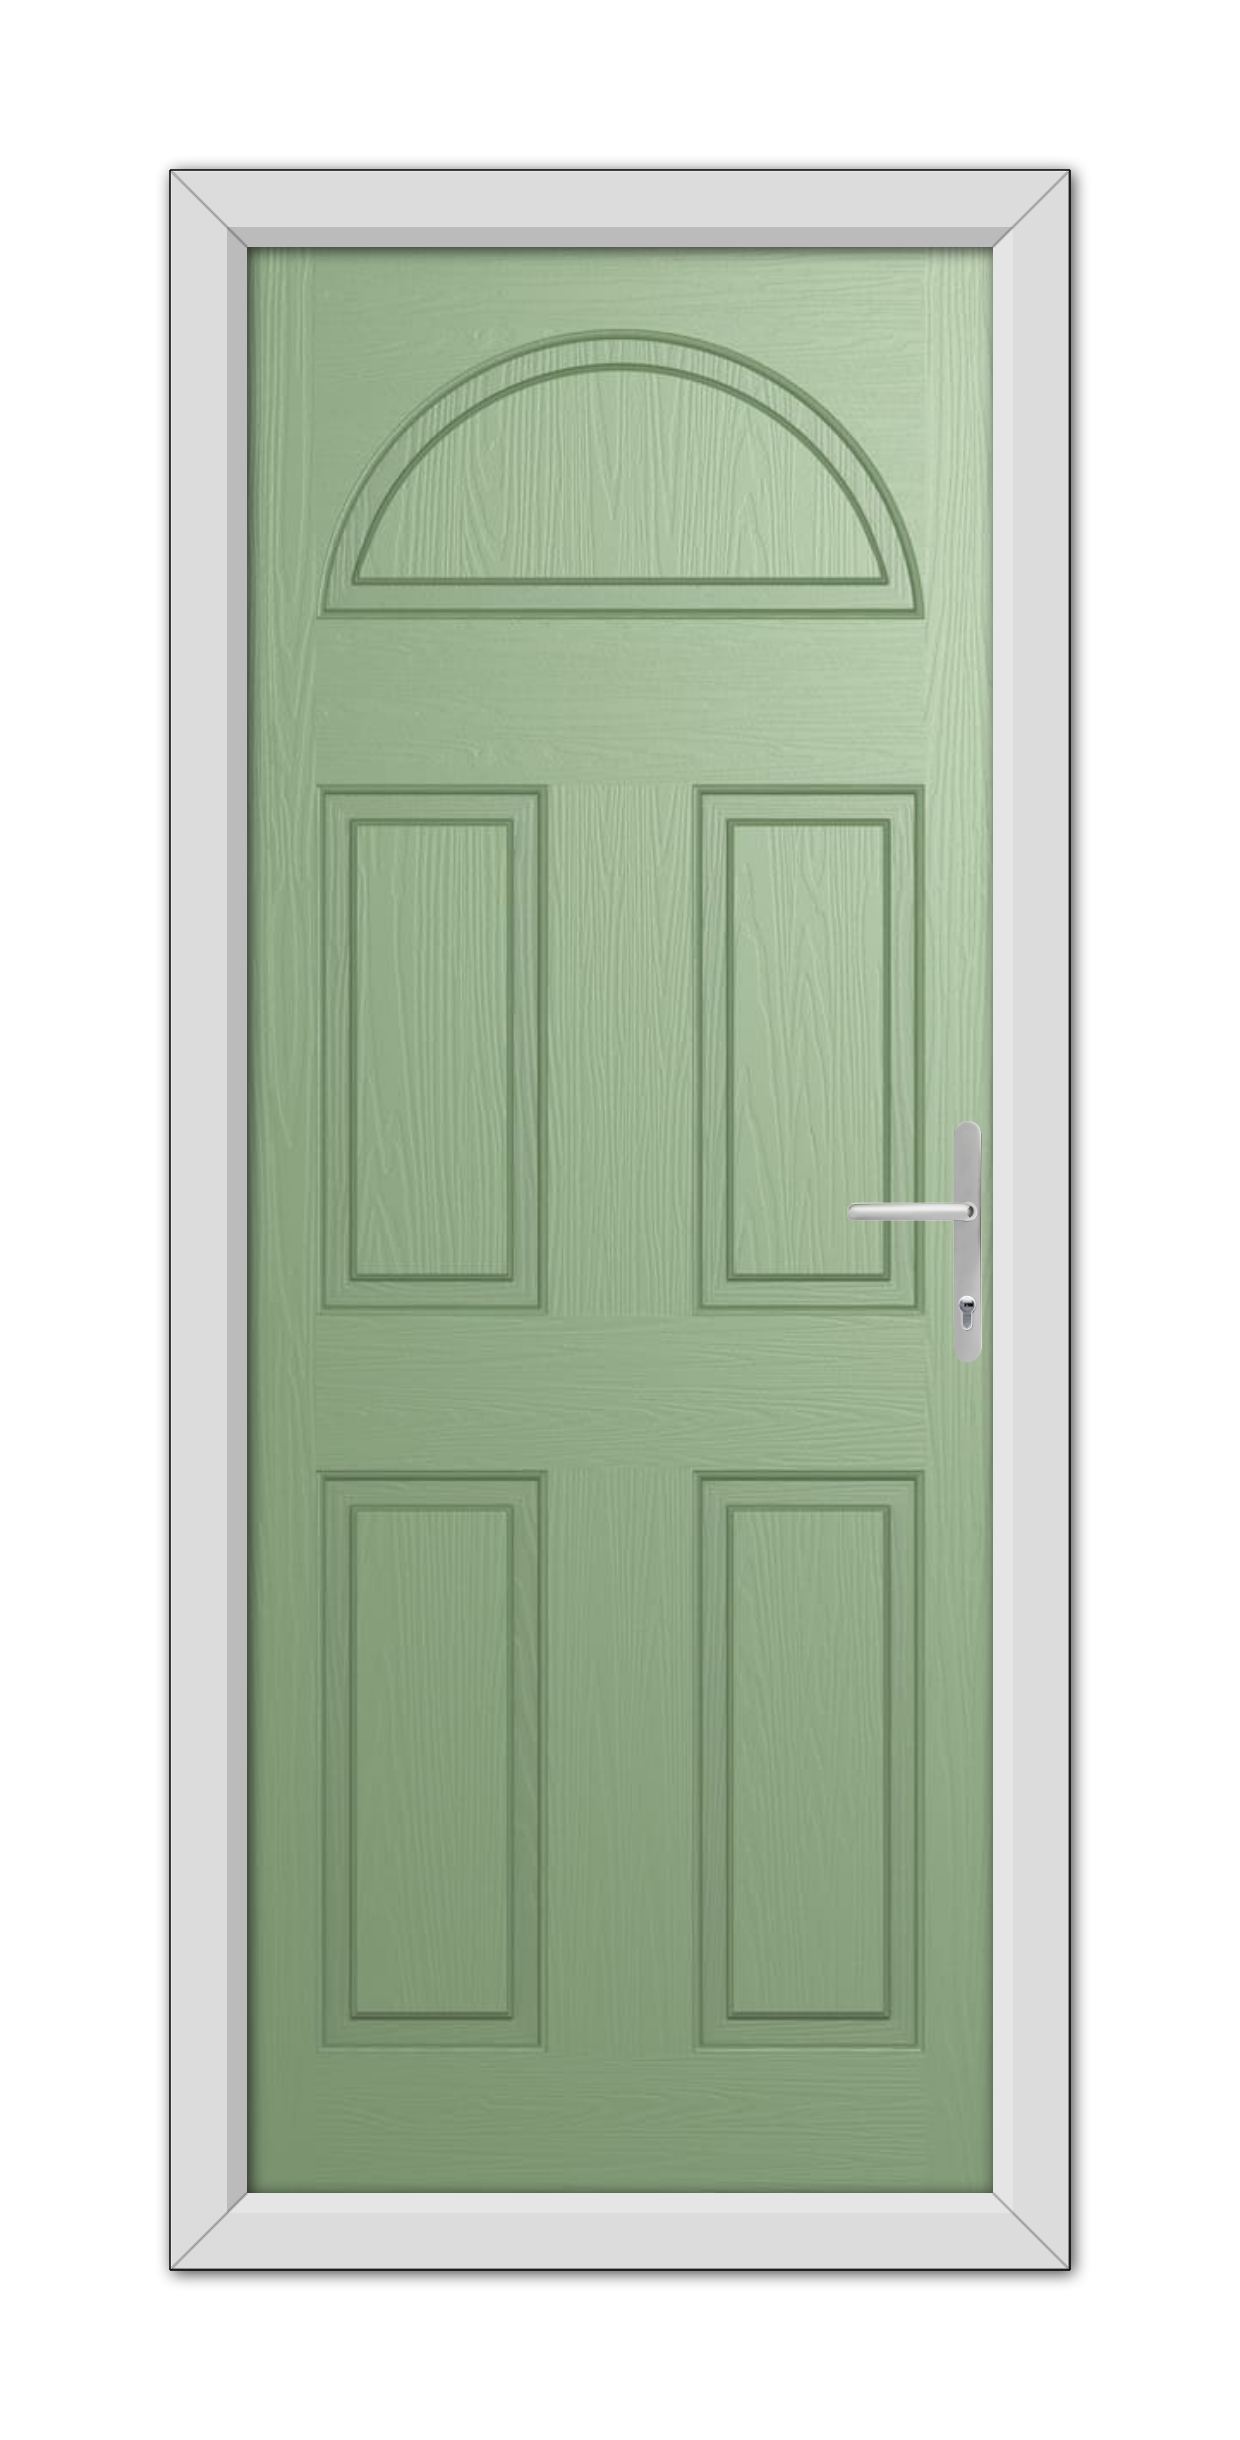 A Chartwell Green Middleton solid stable composite door with six panels and a silver handle, set within a white door frame.